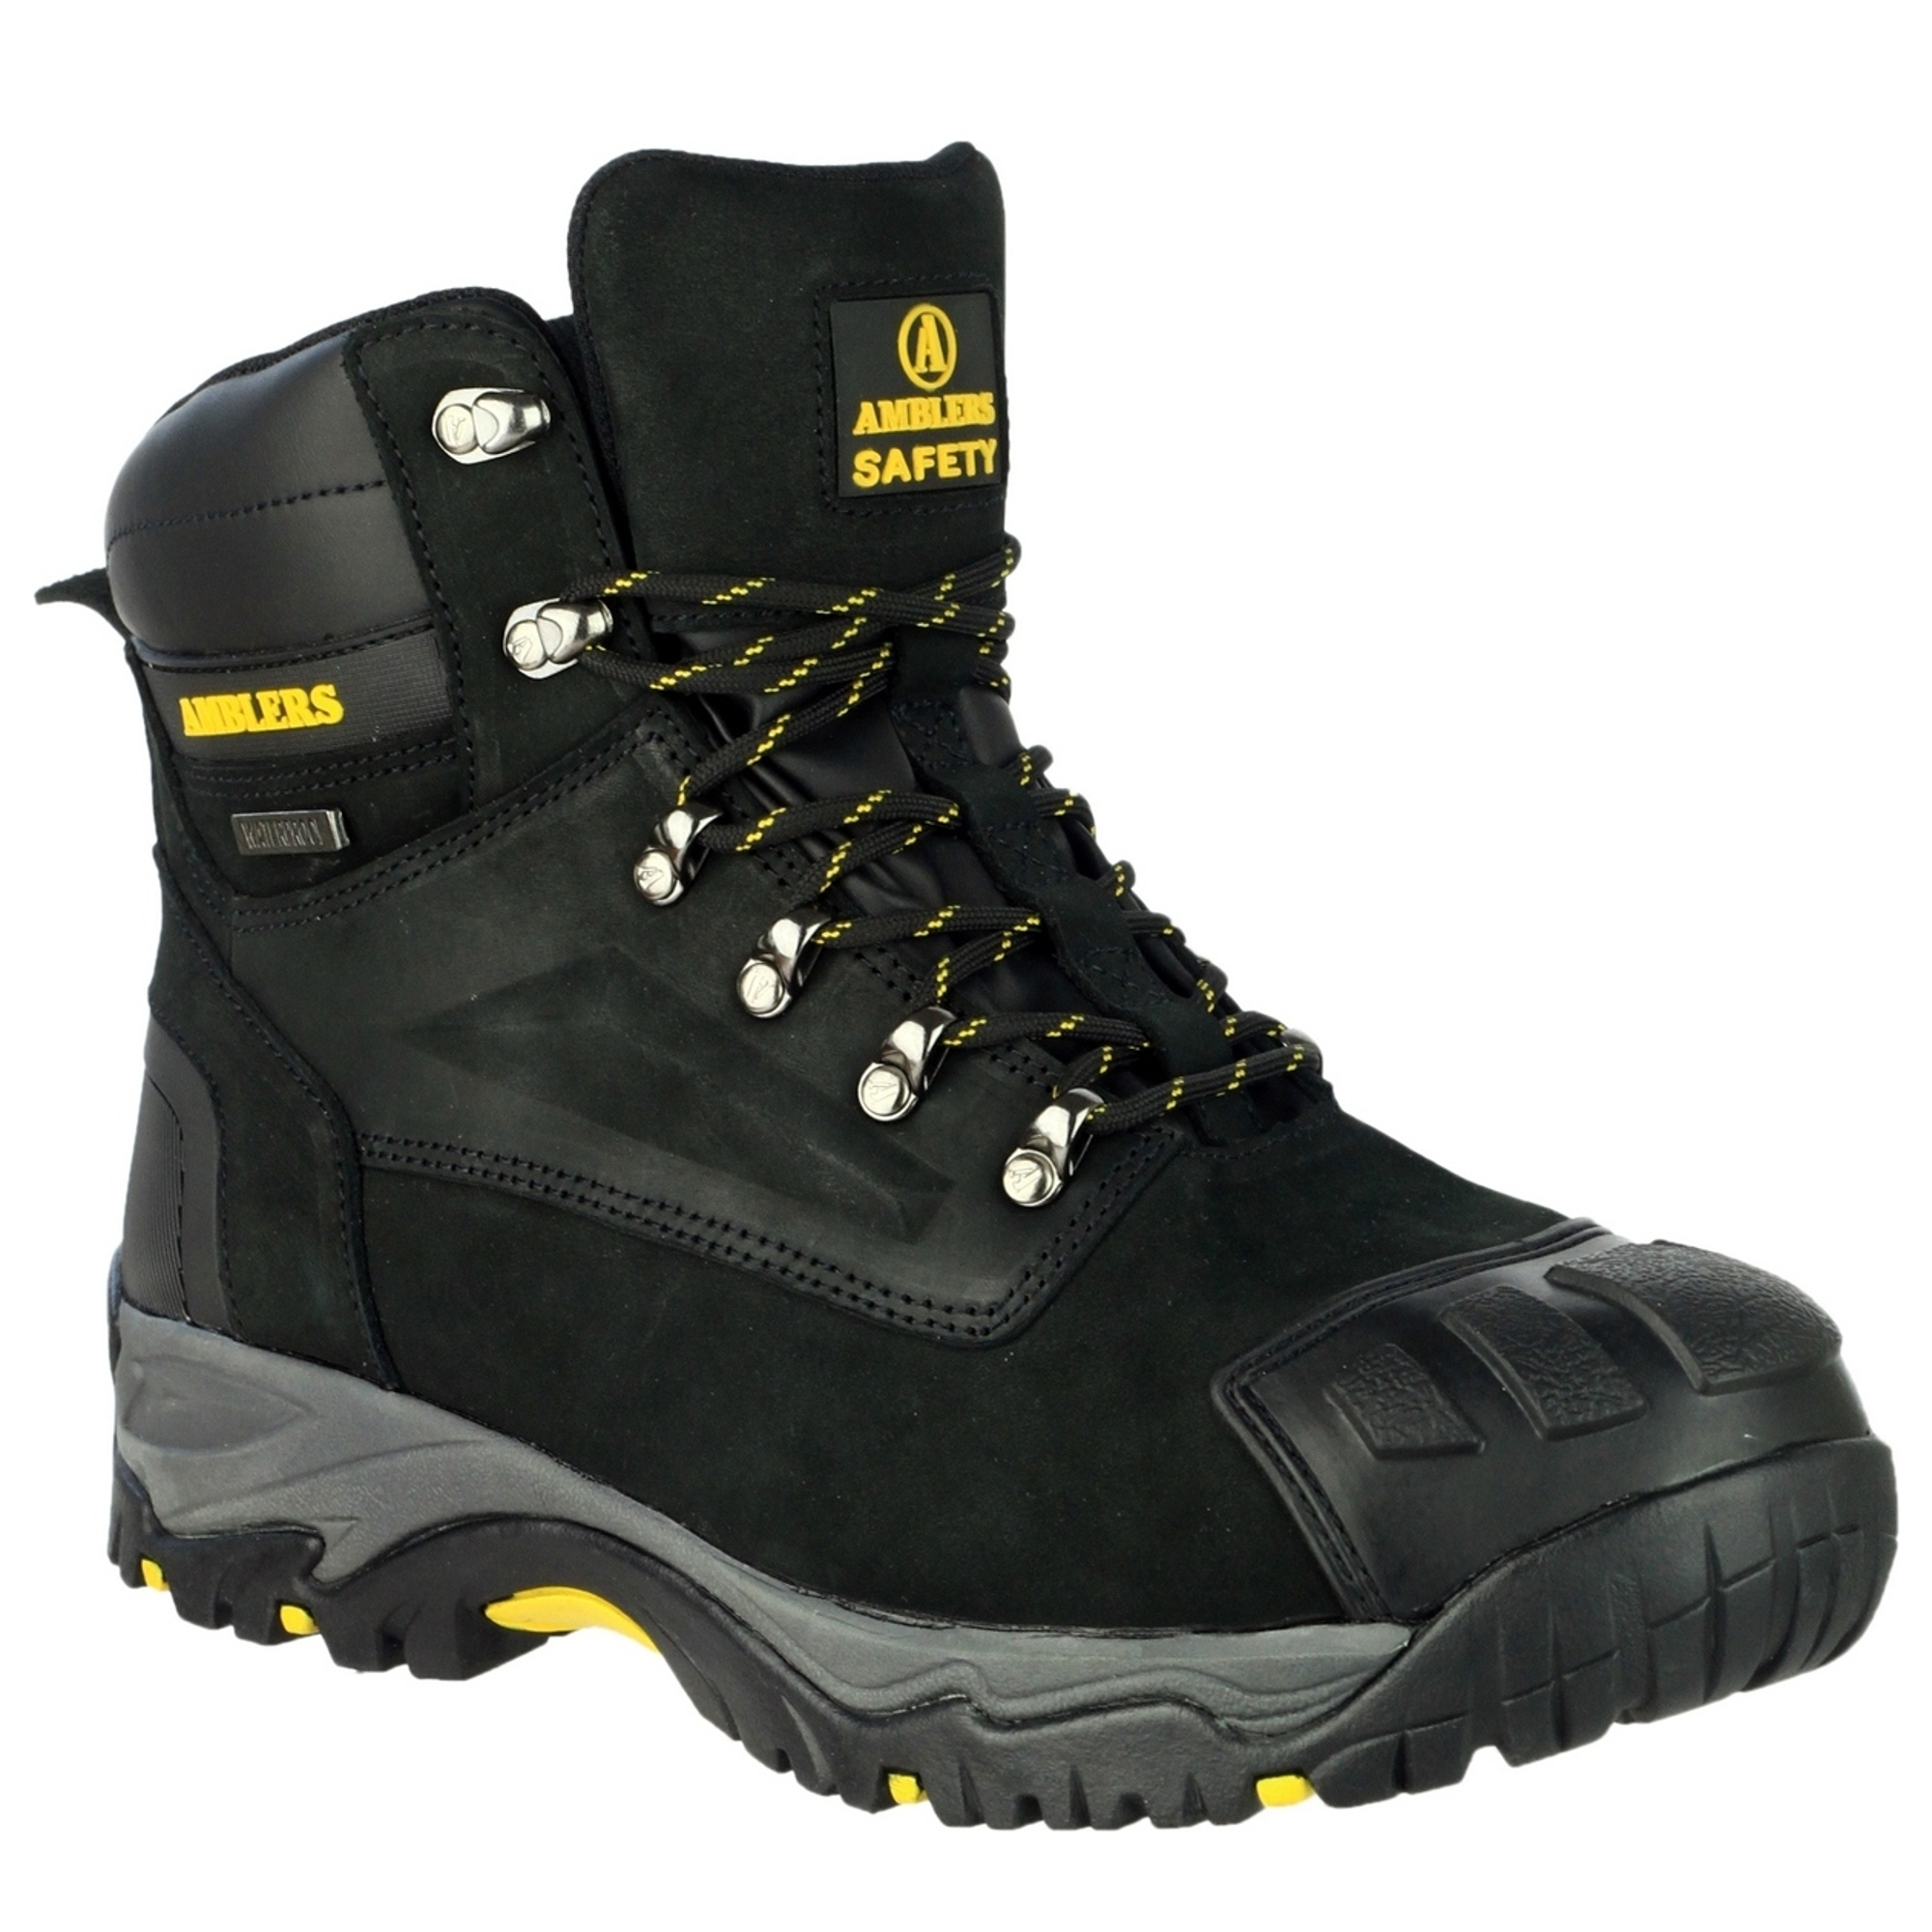 Amblers Fs987 Internal Metatarsal Protection Waterproof Safety Boot